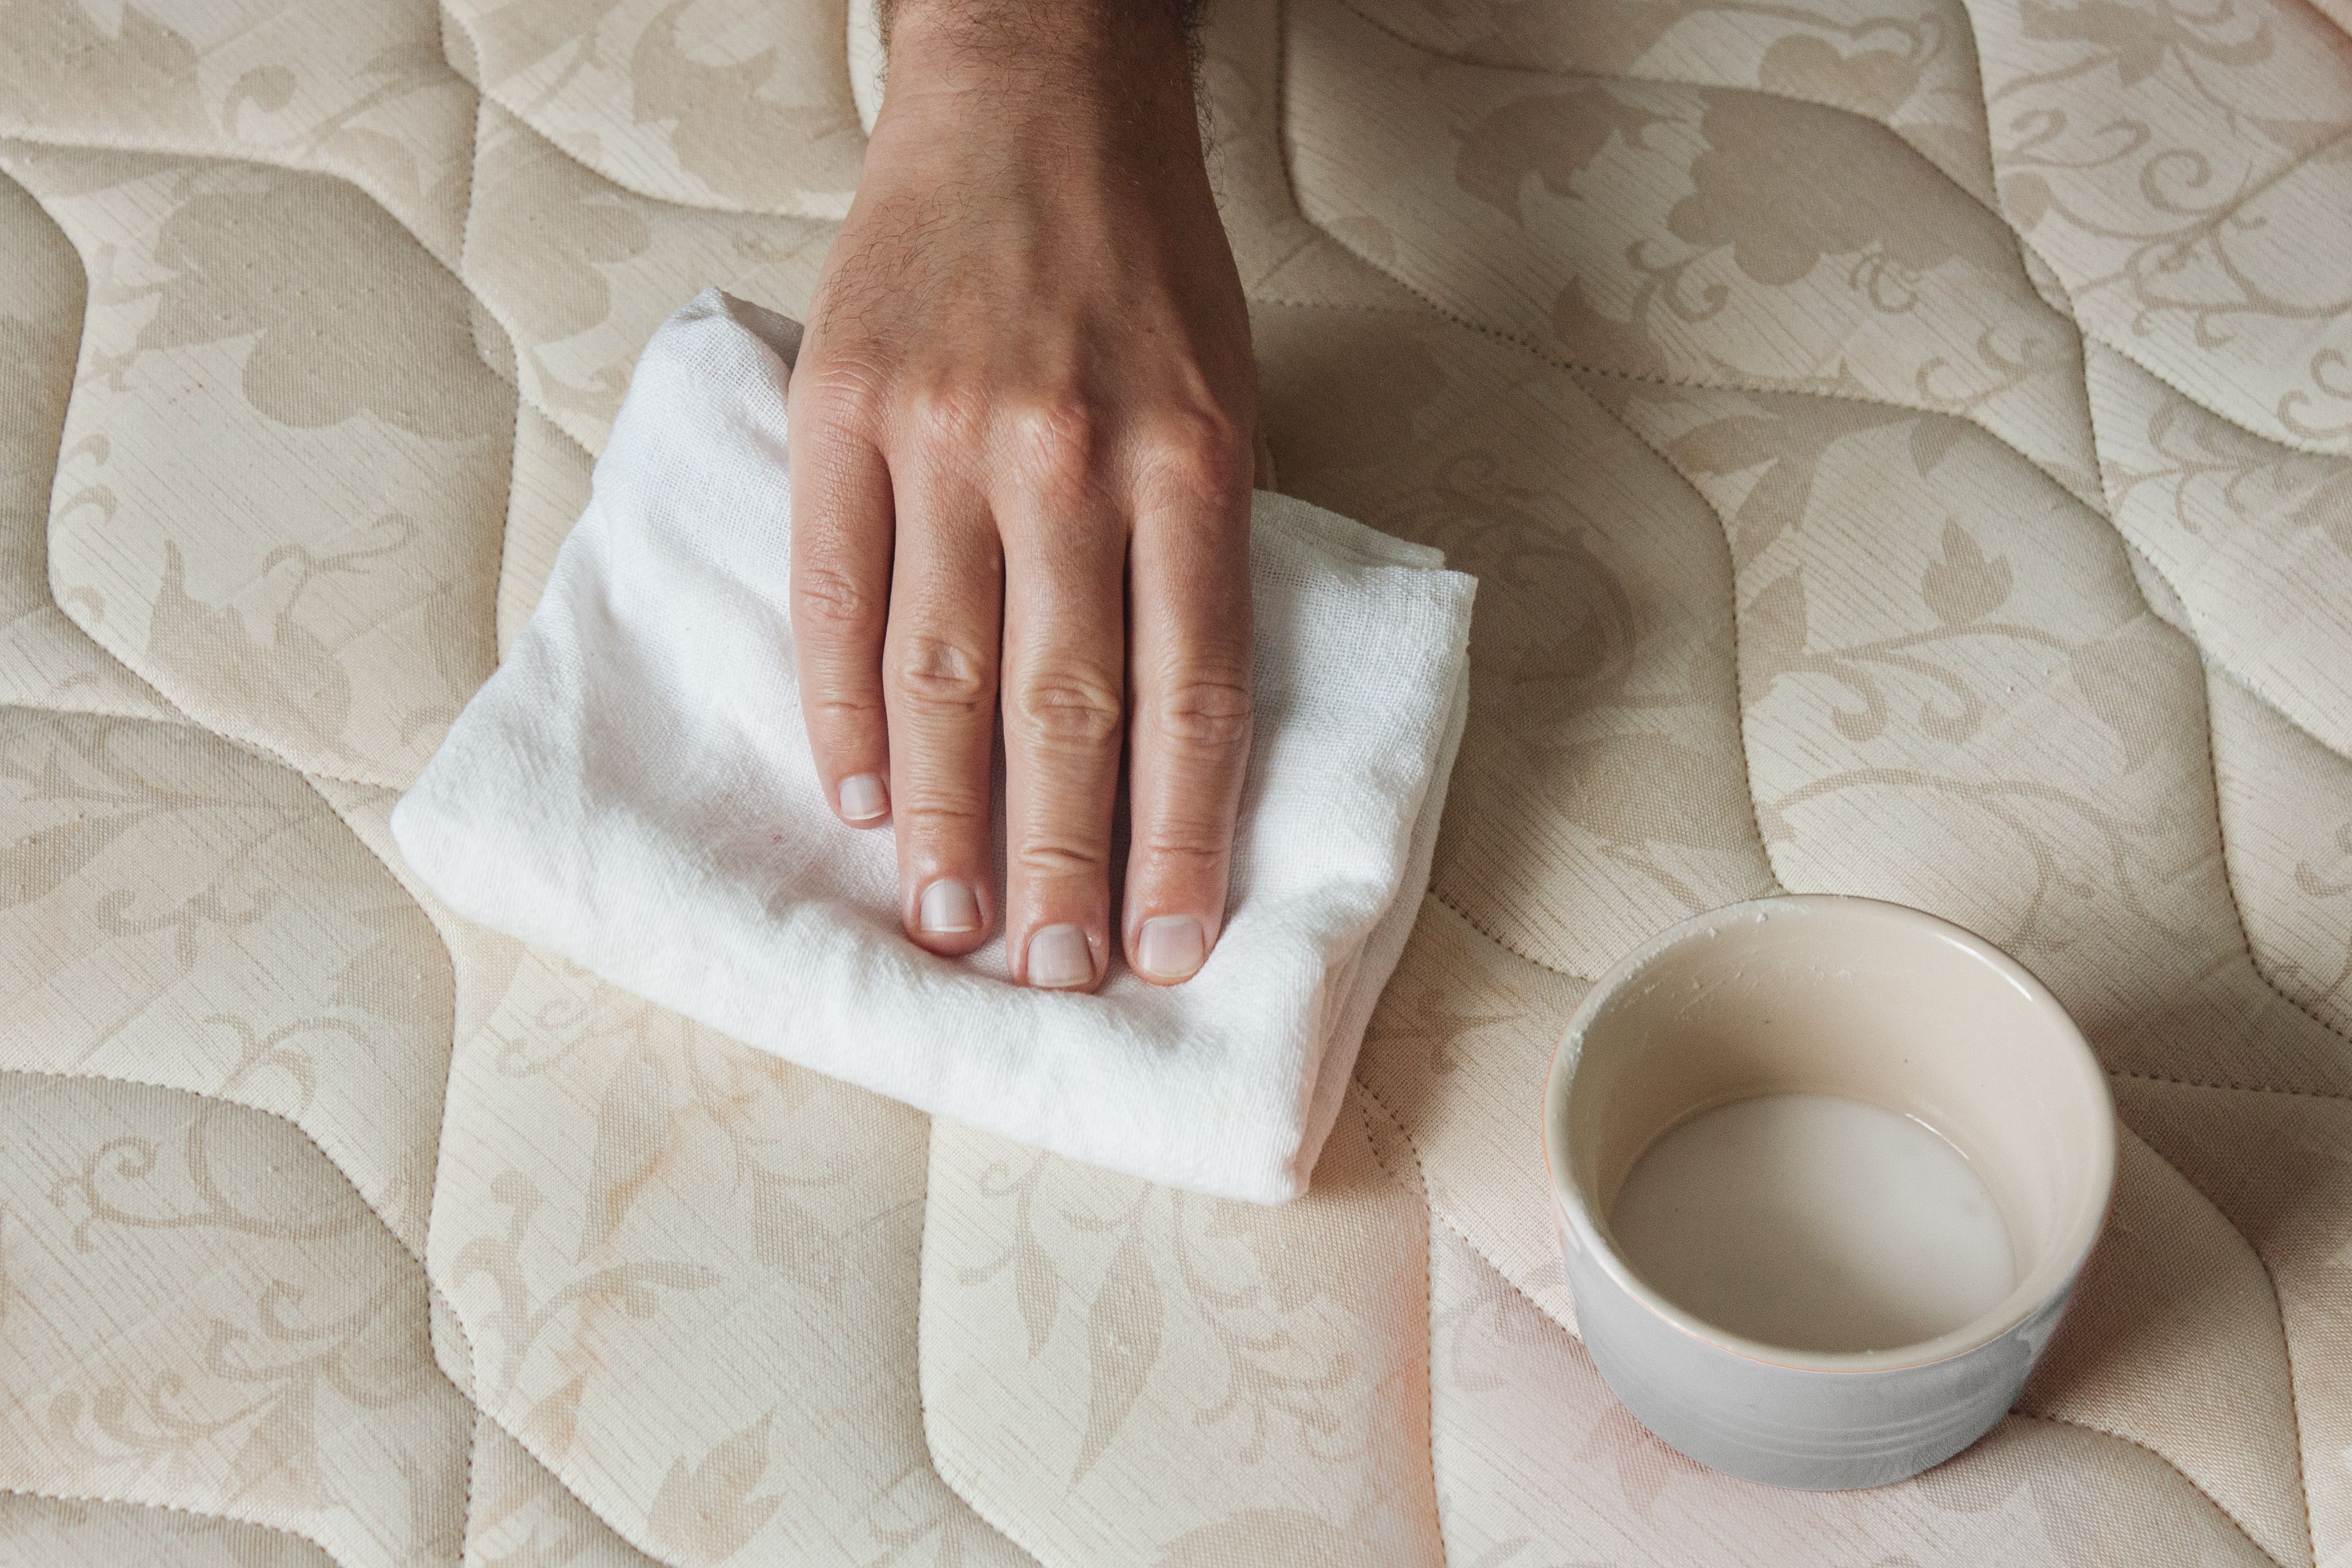 How to Clean Your Mattress Naturally